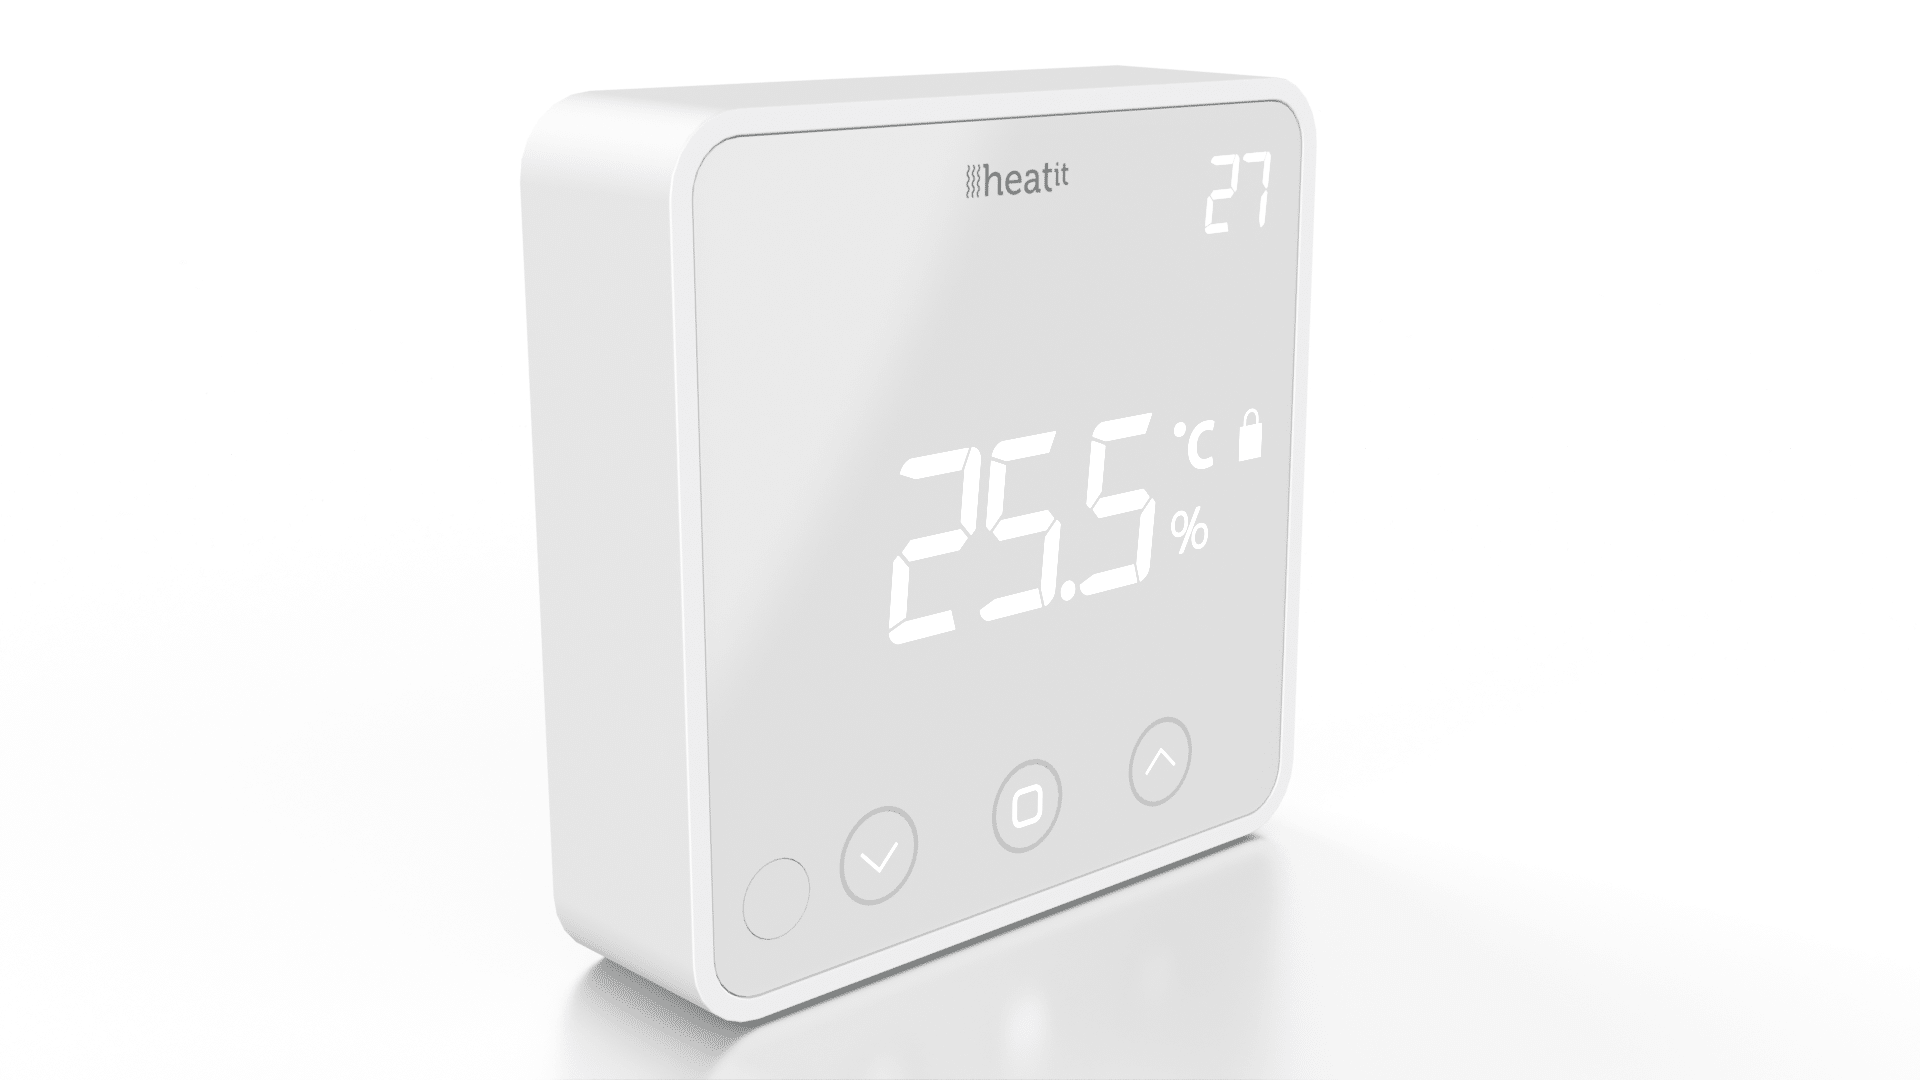 Z-WAVE BATTERY POWERED THERMOSTAT